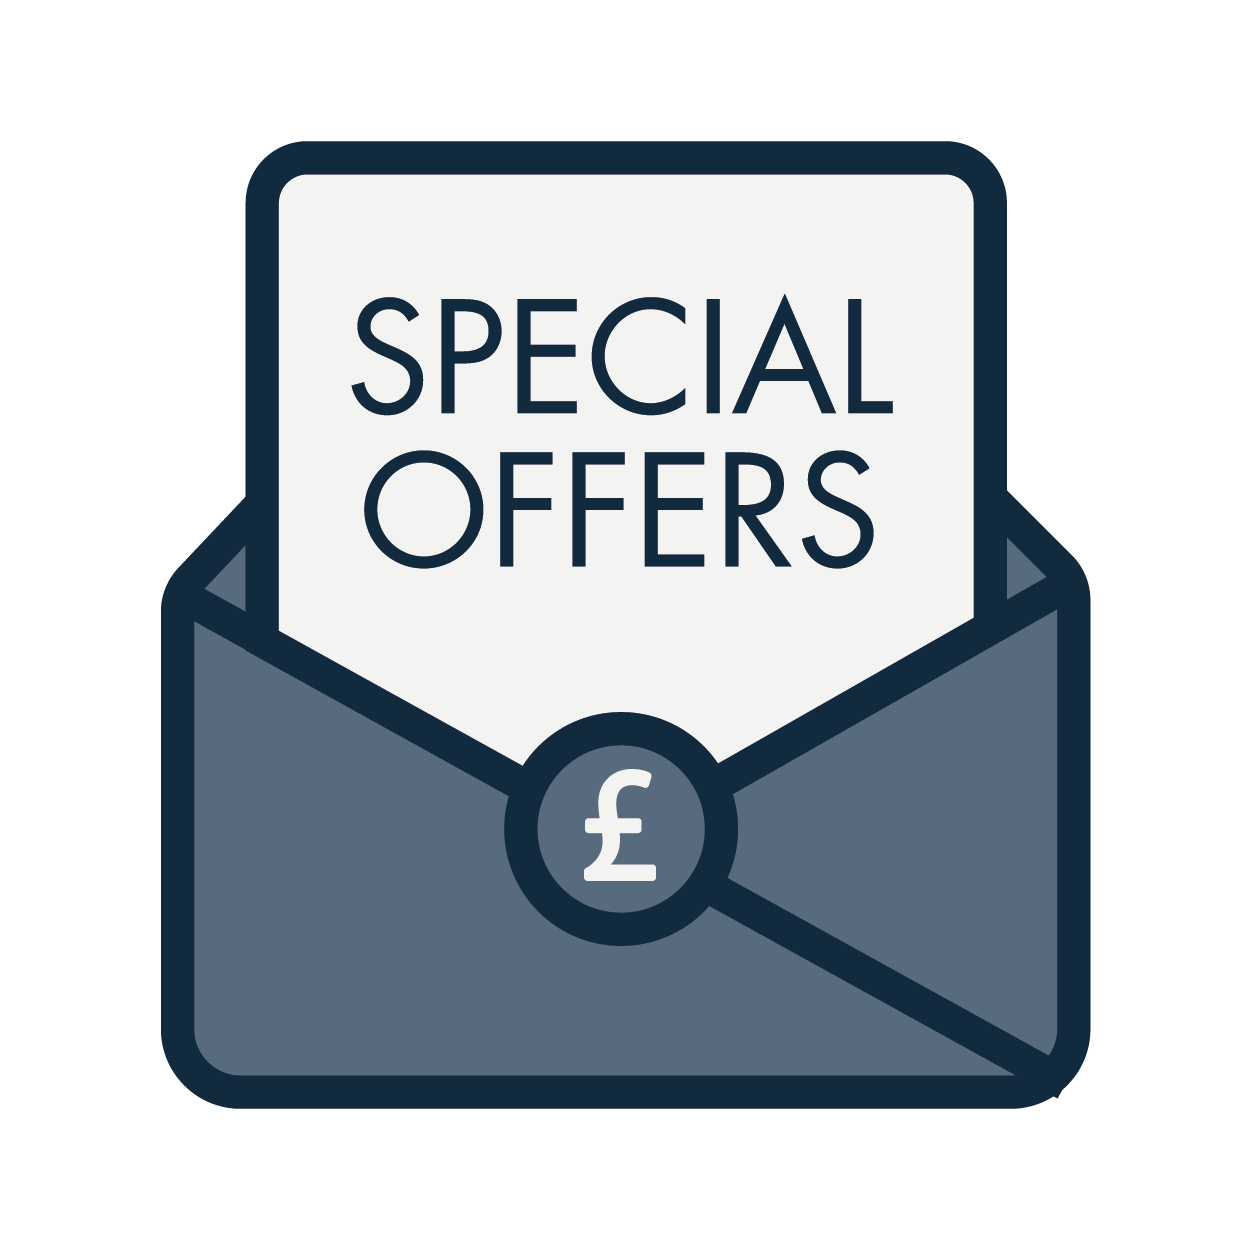 icon image of an envelope with seal with £ on and document saying special offers coming out